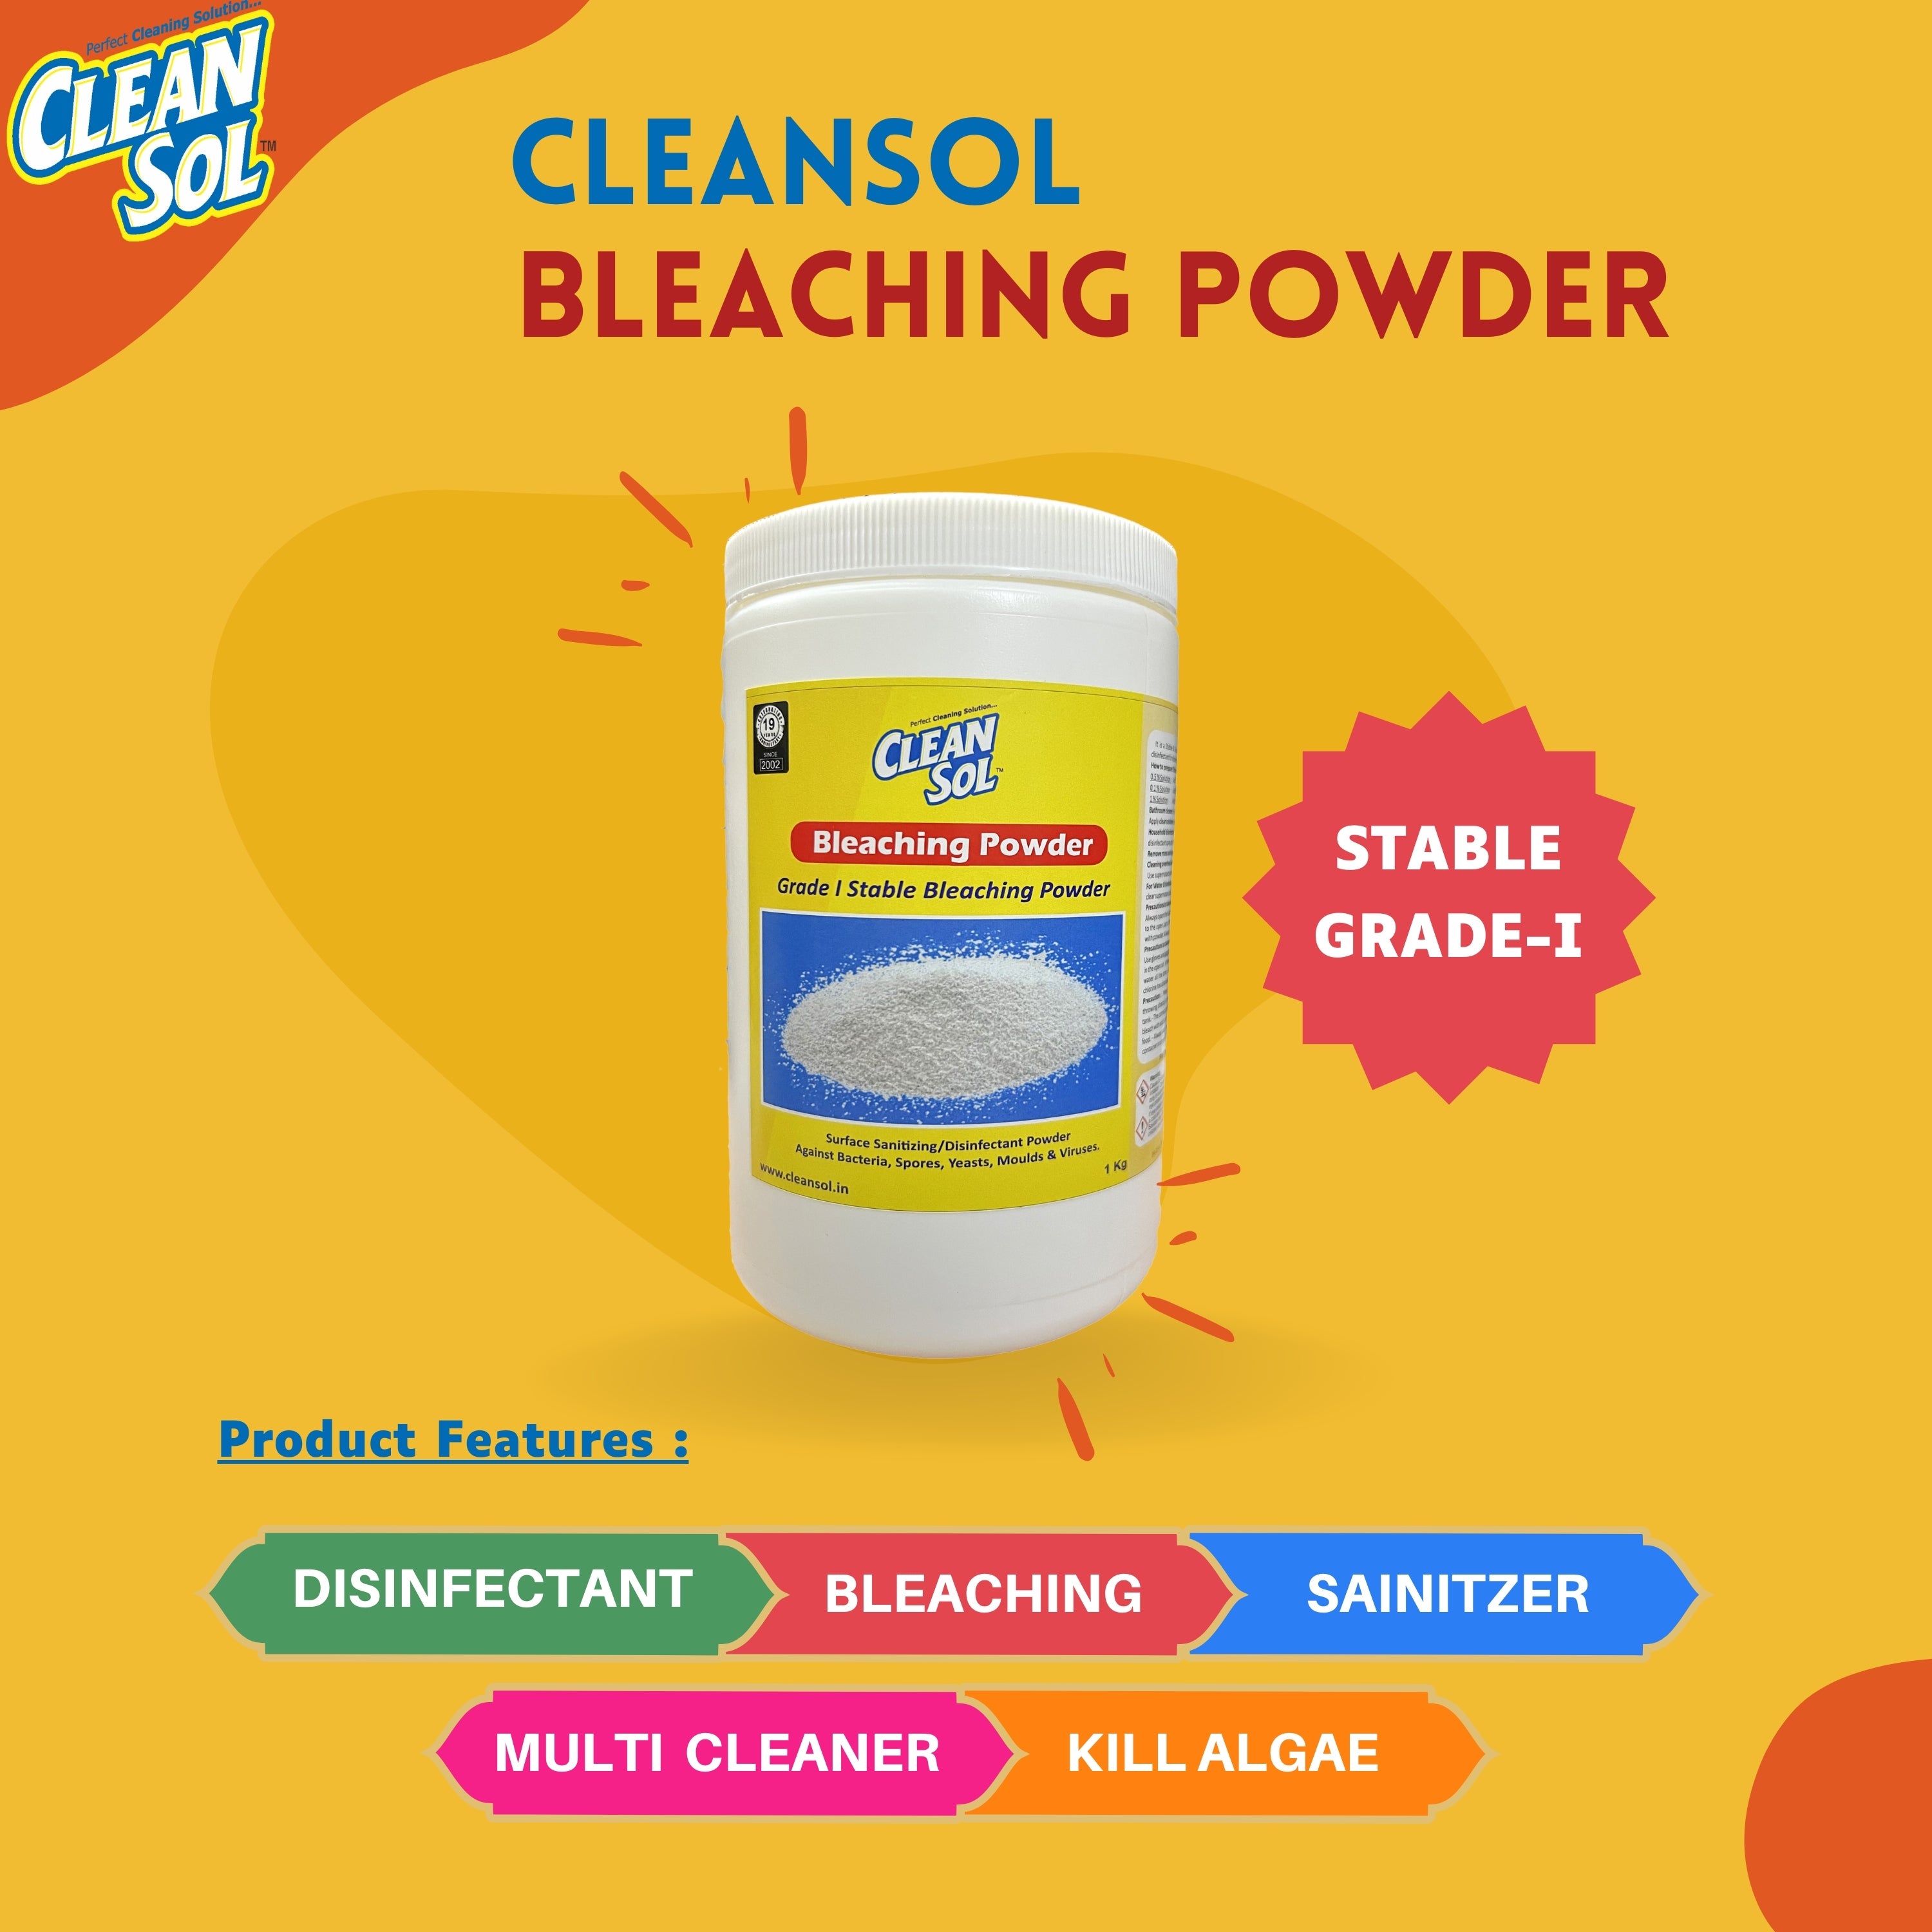 Cleansol Borax Powder for Whitening, Cleaning & Making Slime